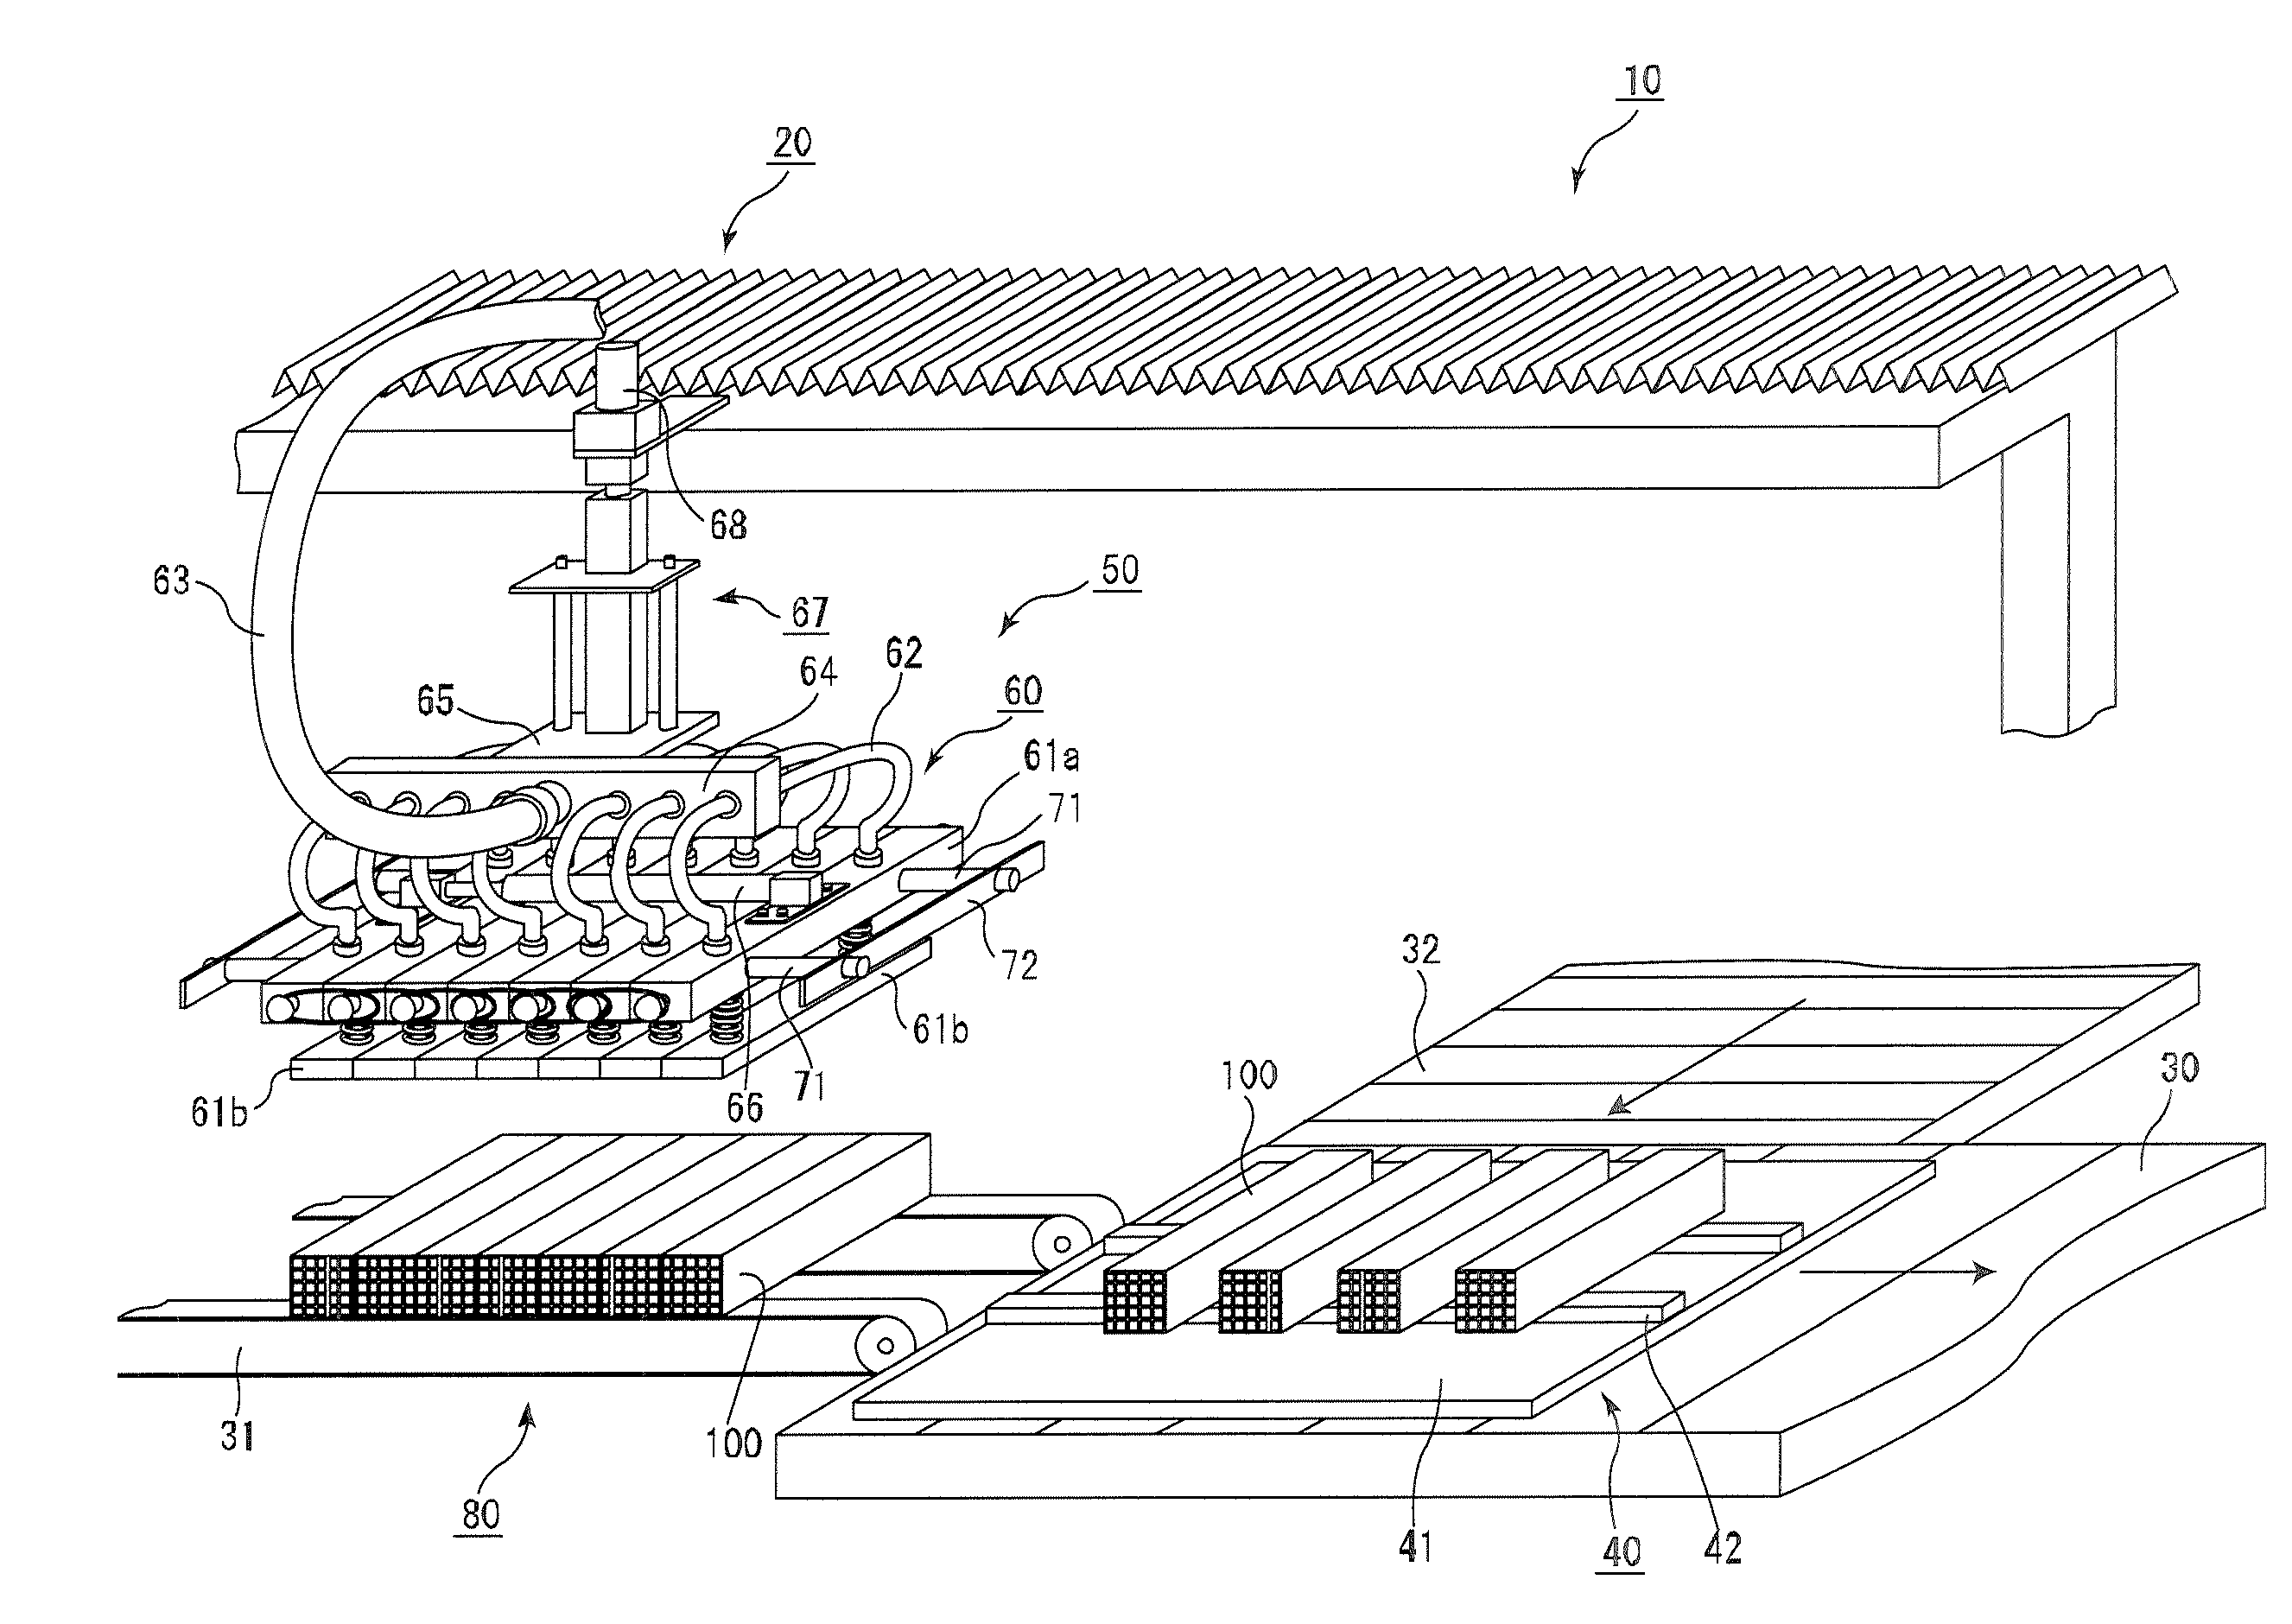 Degreasing furnace loading apparatus, and method for manufacturing honeycomb structure